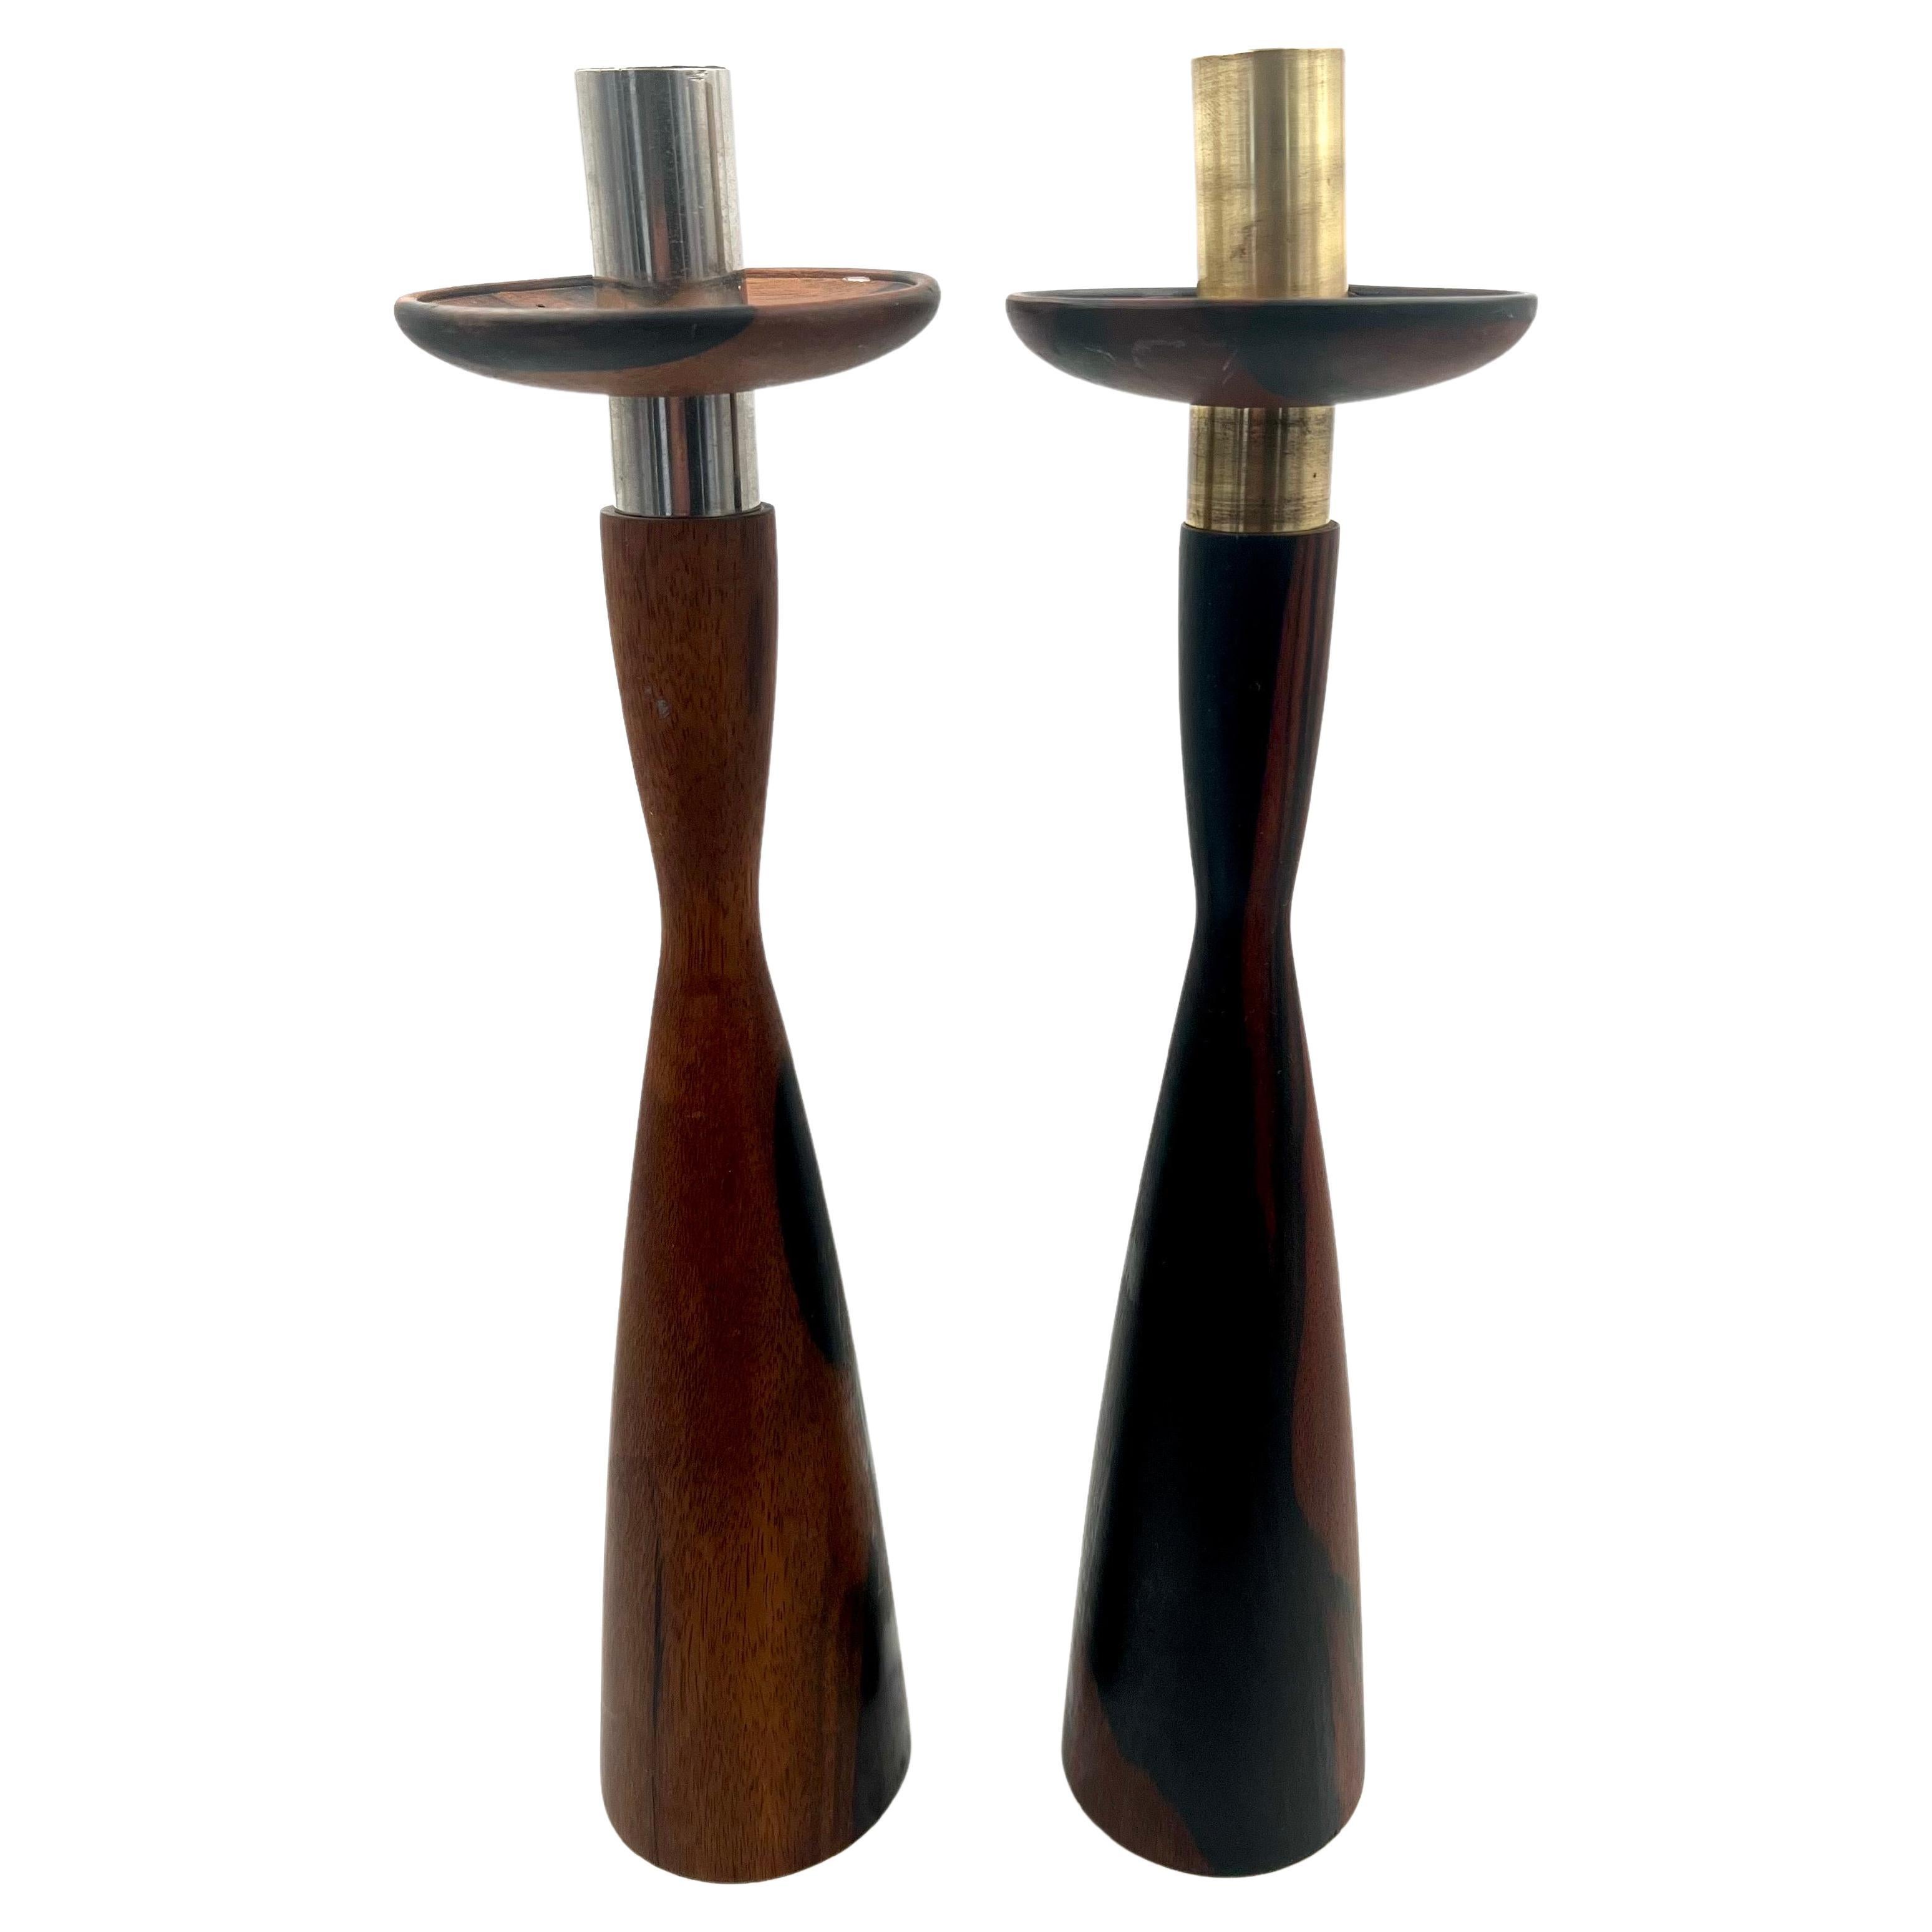 Majestic Solid Rosewood Tall Candle Holders Danish Modern